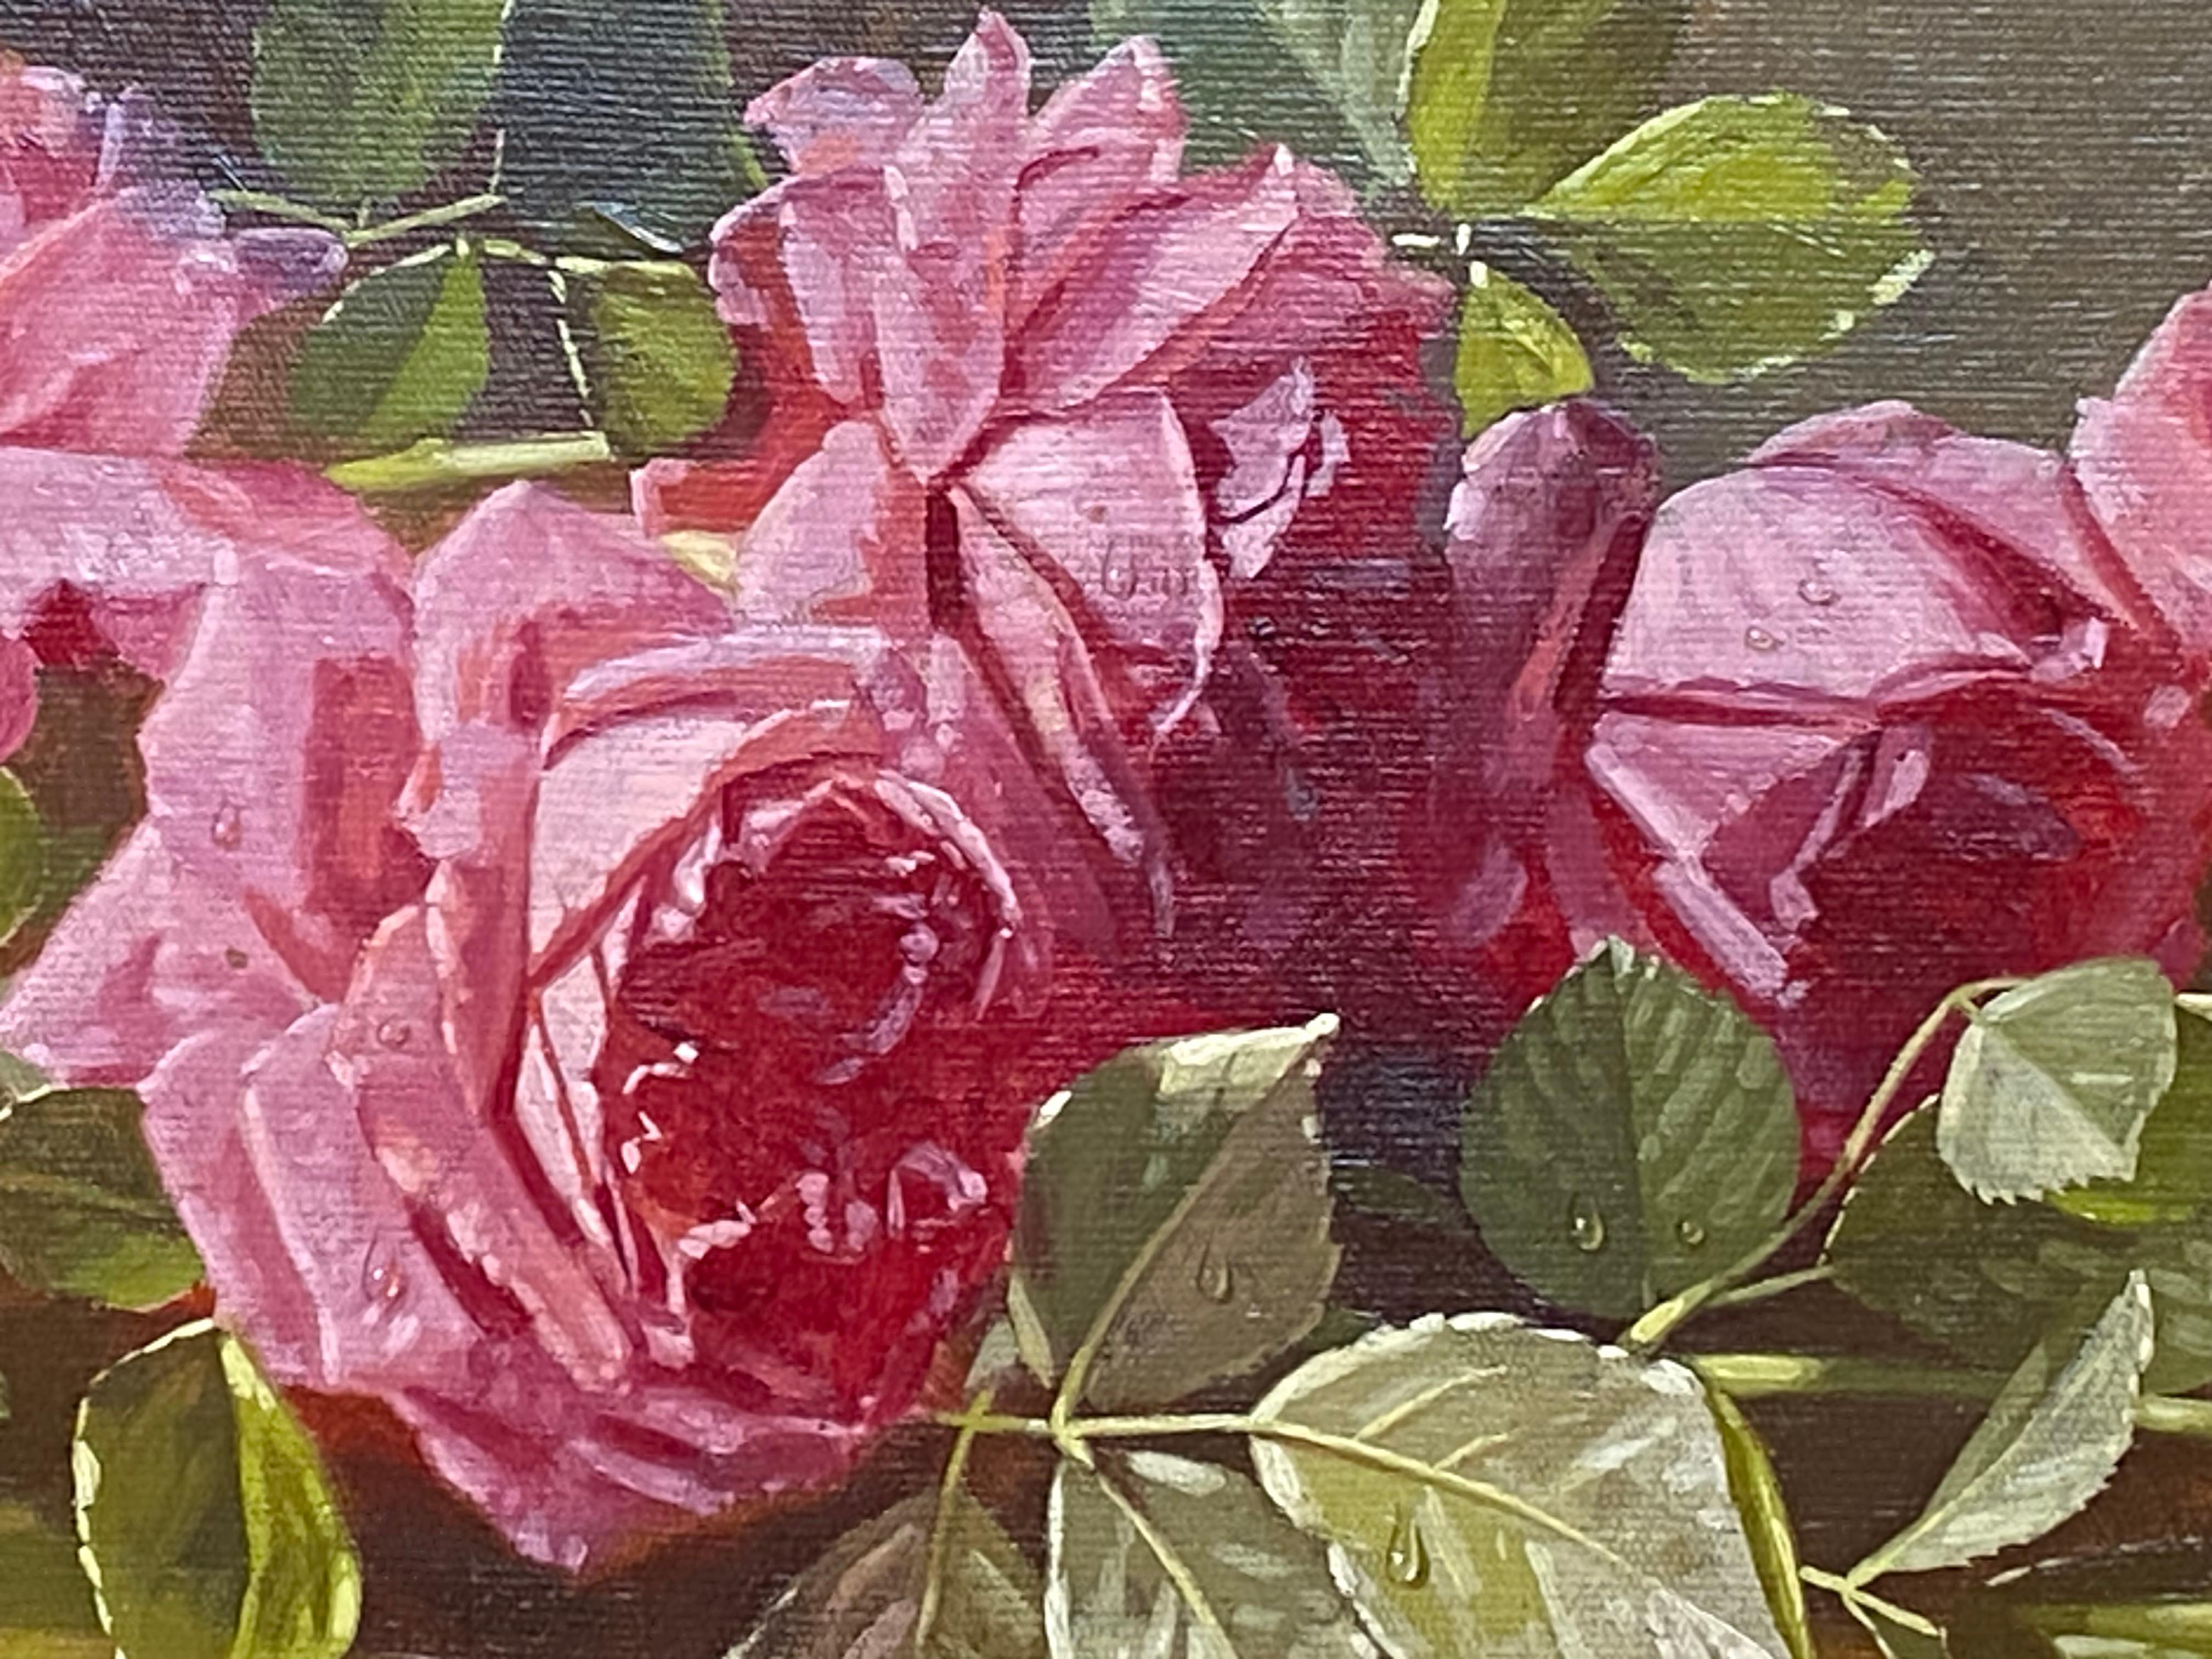 Very fine example of the artistry of the master still life painter of his day, Edward Chalmers Leavitt.  A still life of just cut red roses on a table top. Drops of dew can be even on several of the roses and  leaves. Beautifully painted in an